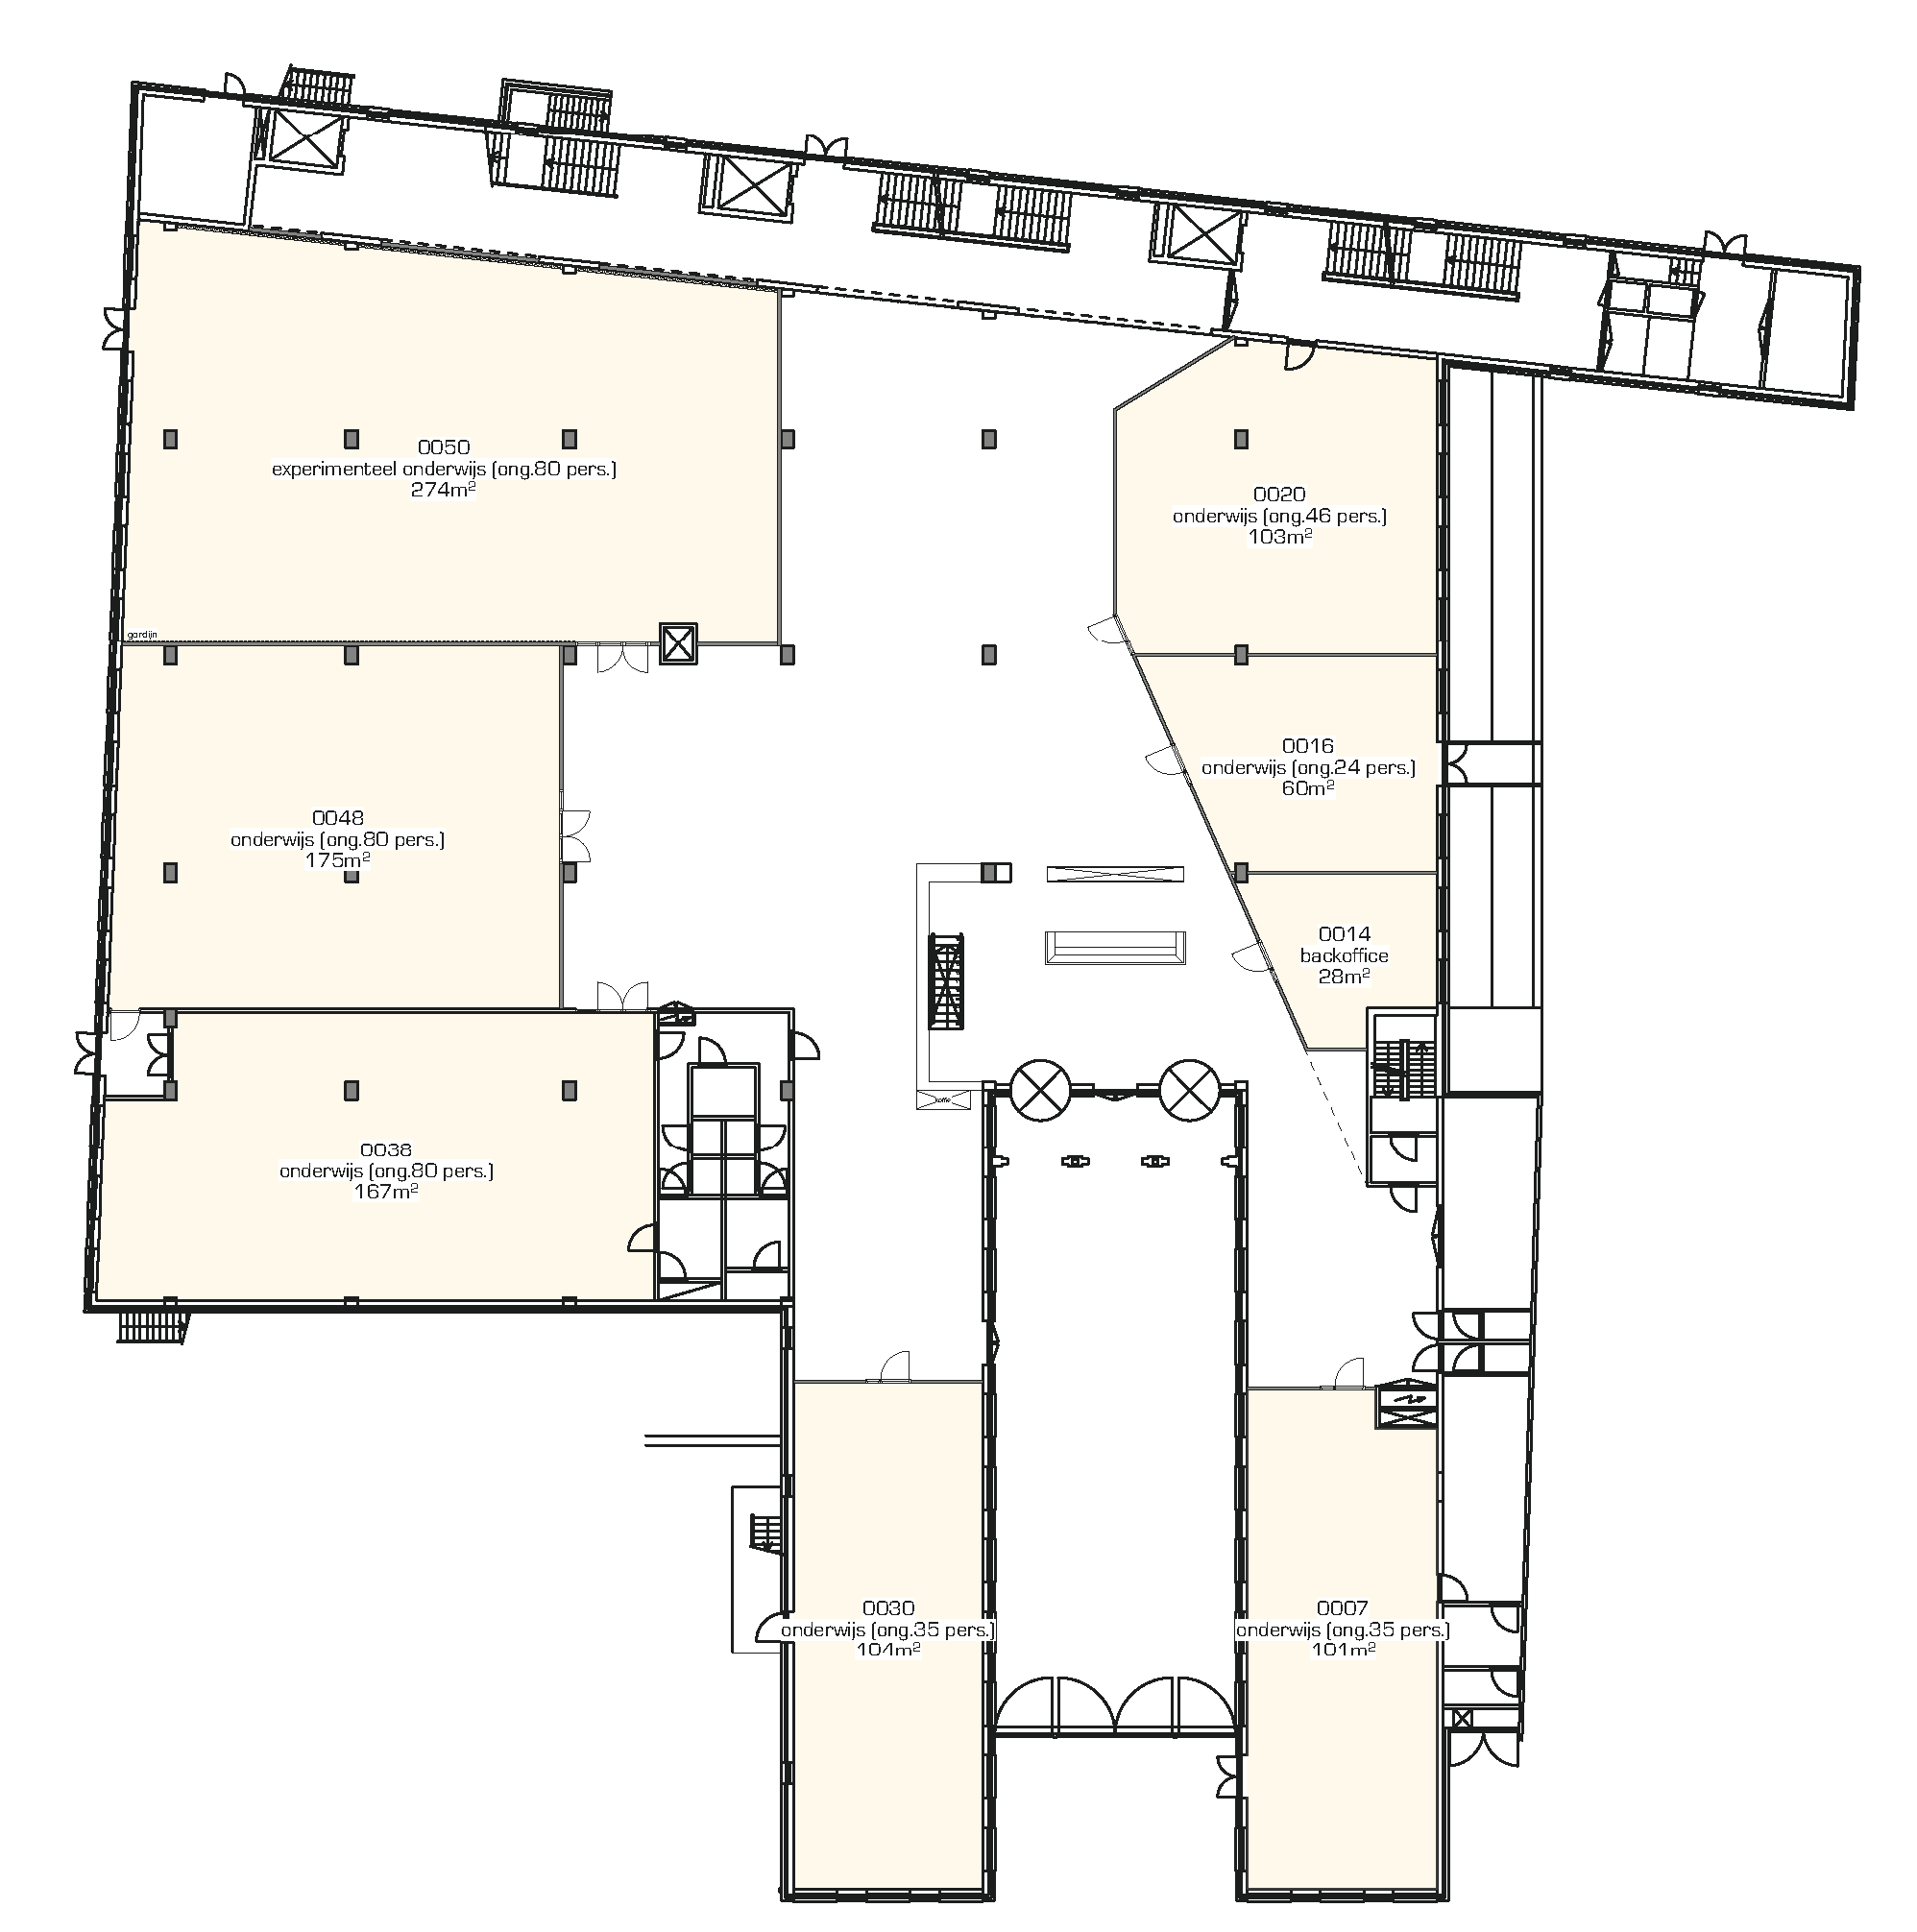 Floor plan of the ground floor with additional classrooms